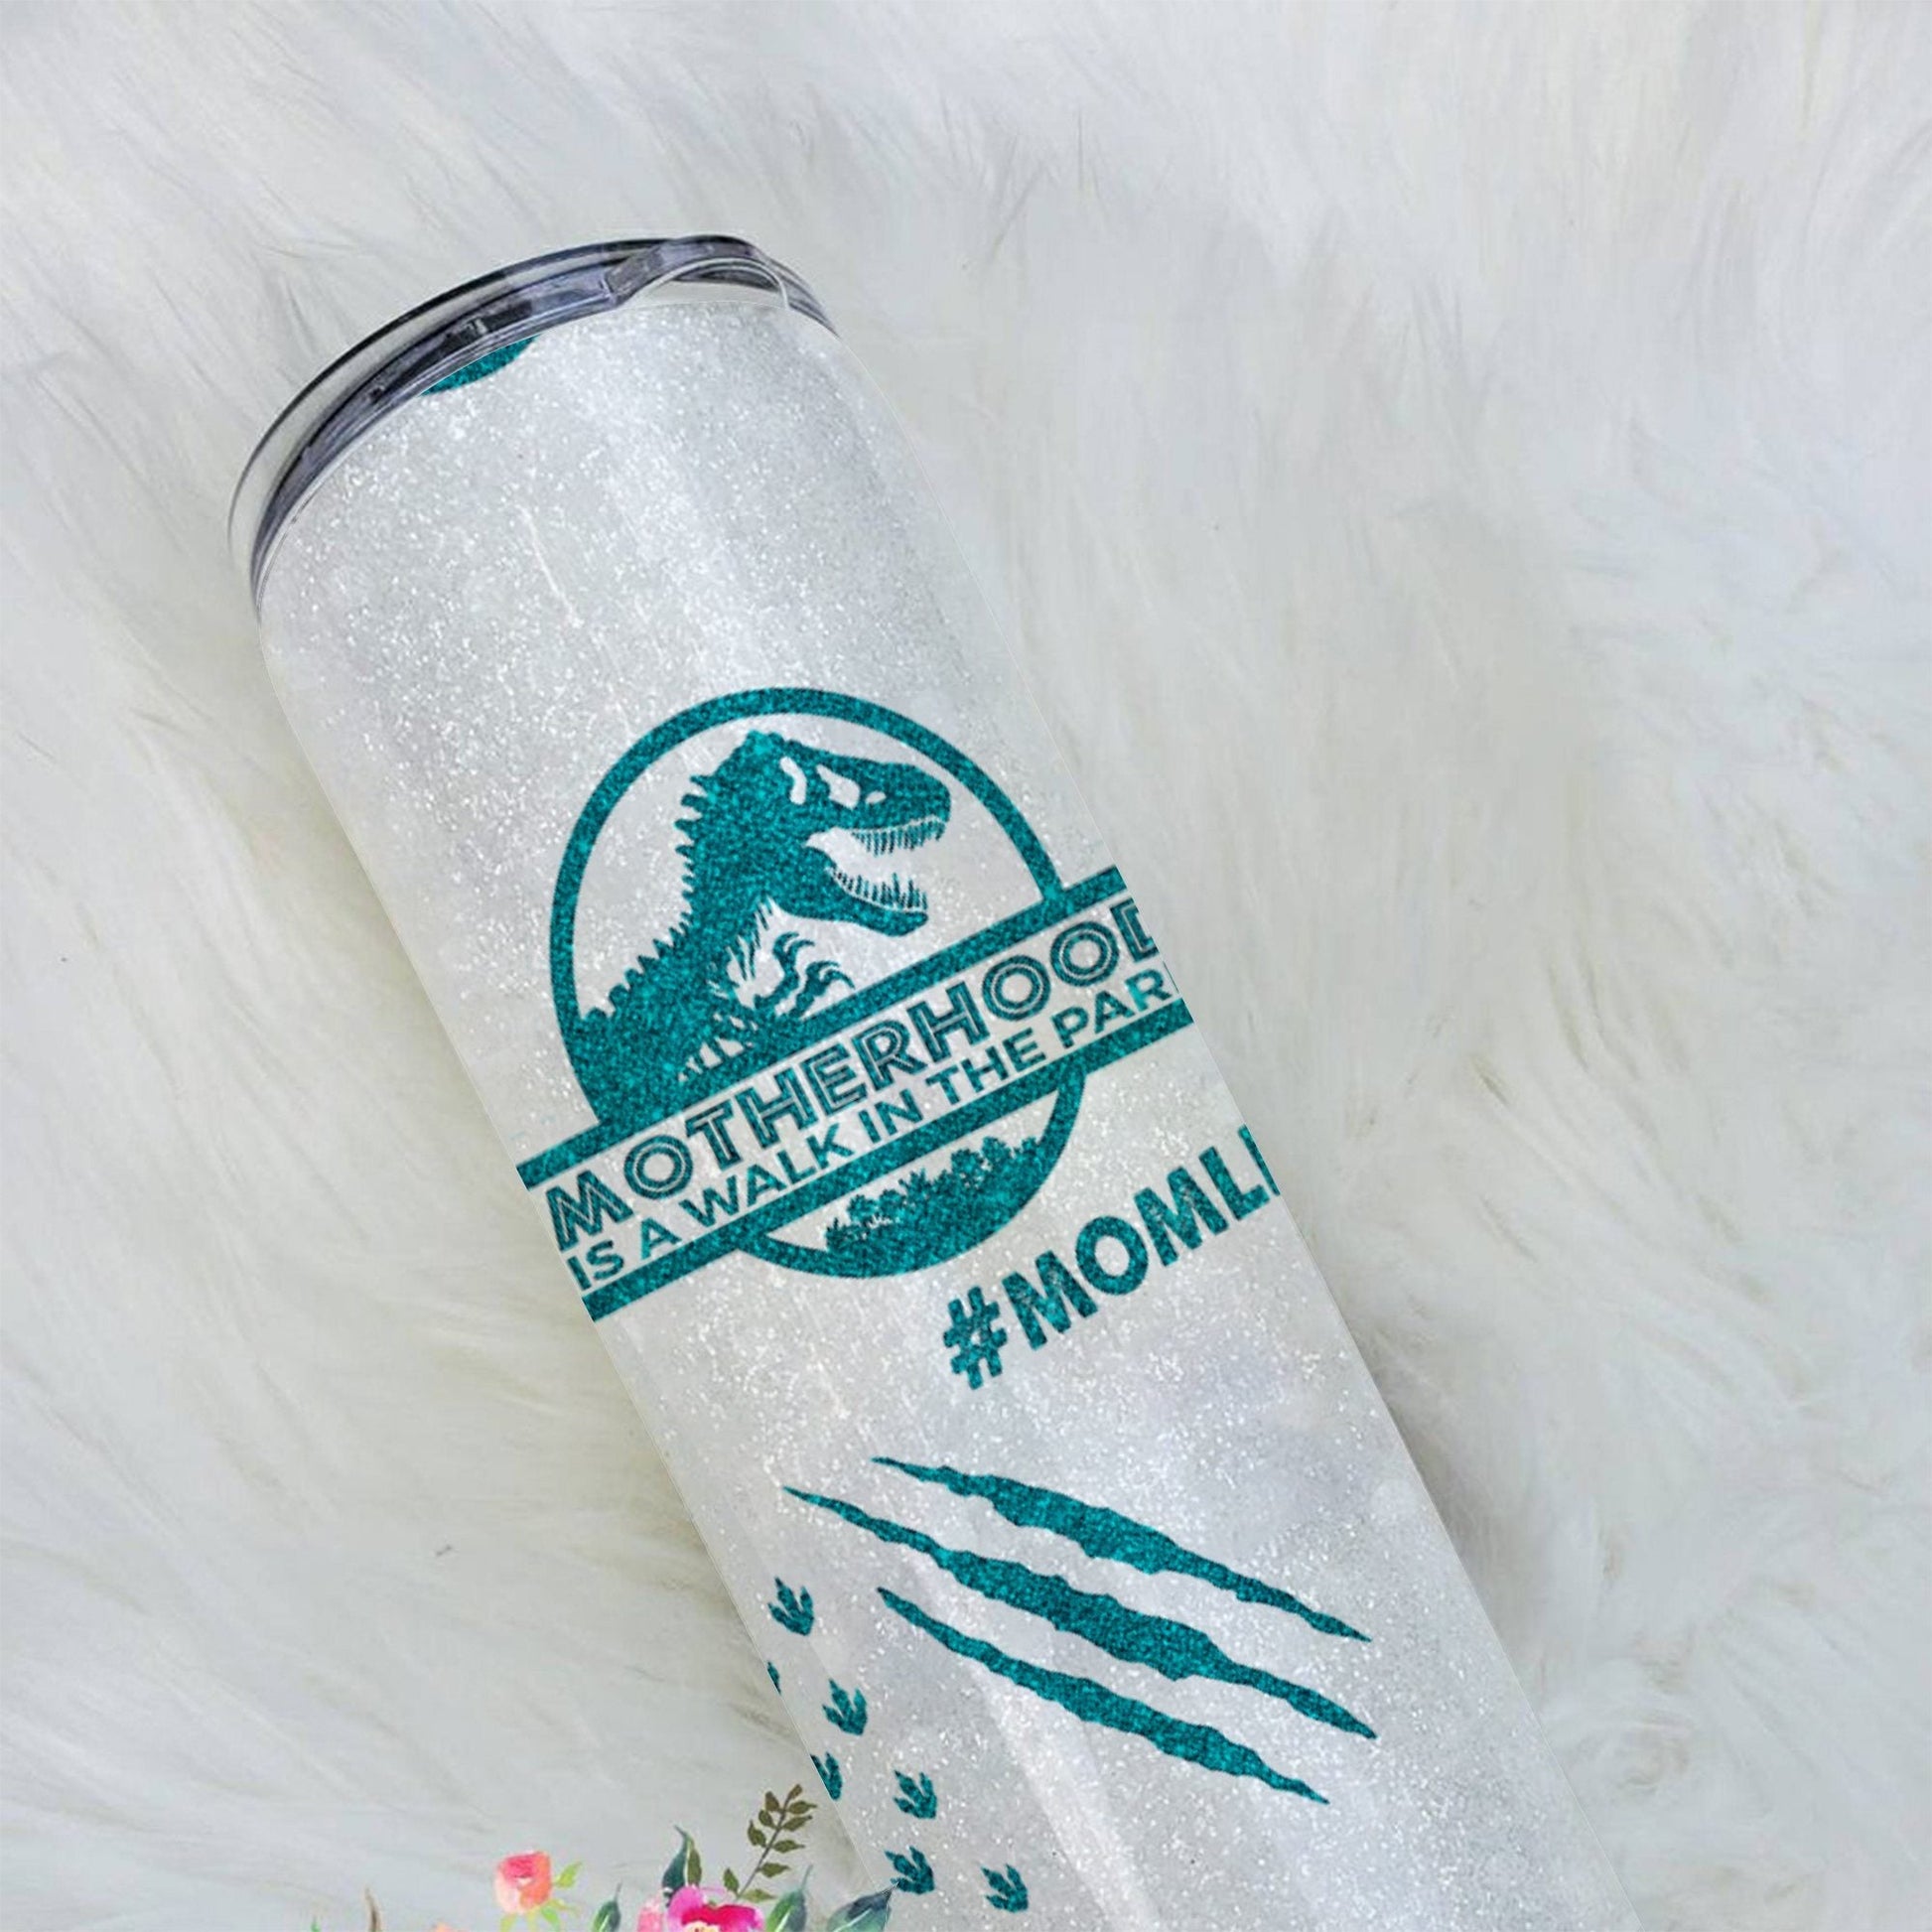 Gearhumans 3D Motherhood Is A Walk In The Park Mothers Day Gift Custom Name Design Insulated Vacuum Tumbler GW260313 Tumbler